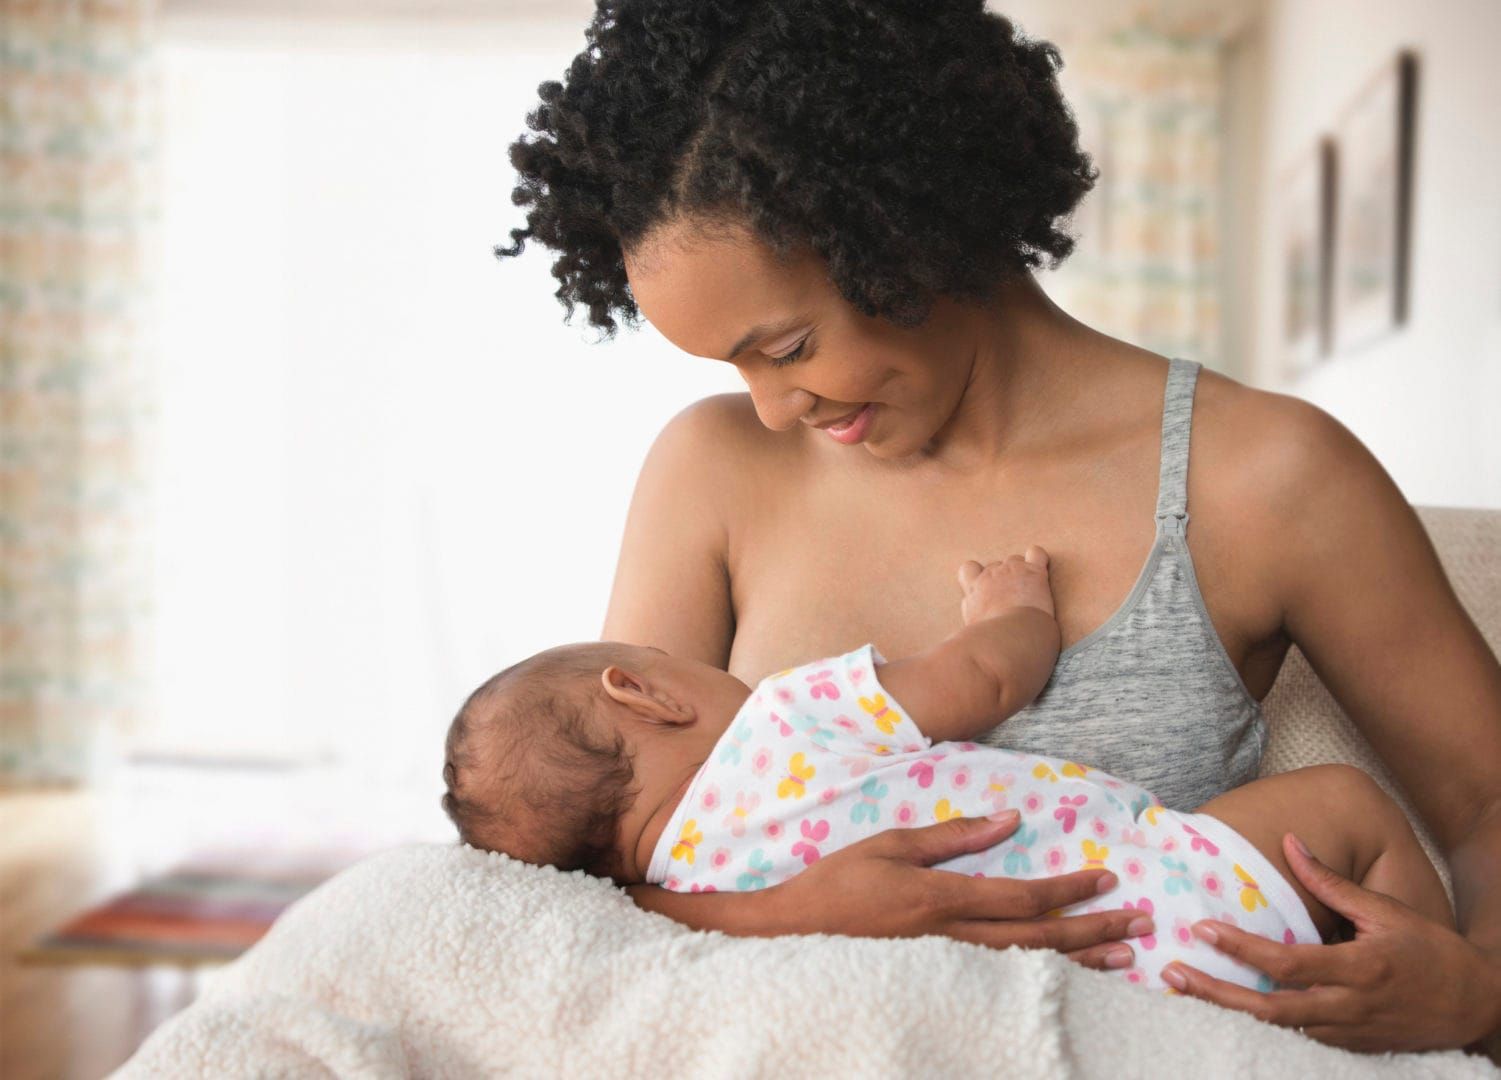 The pros and cons of breastfeeding for every new mom to consider